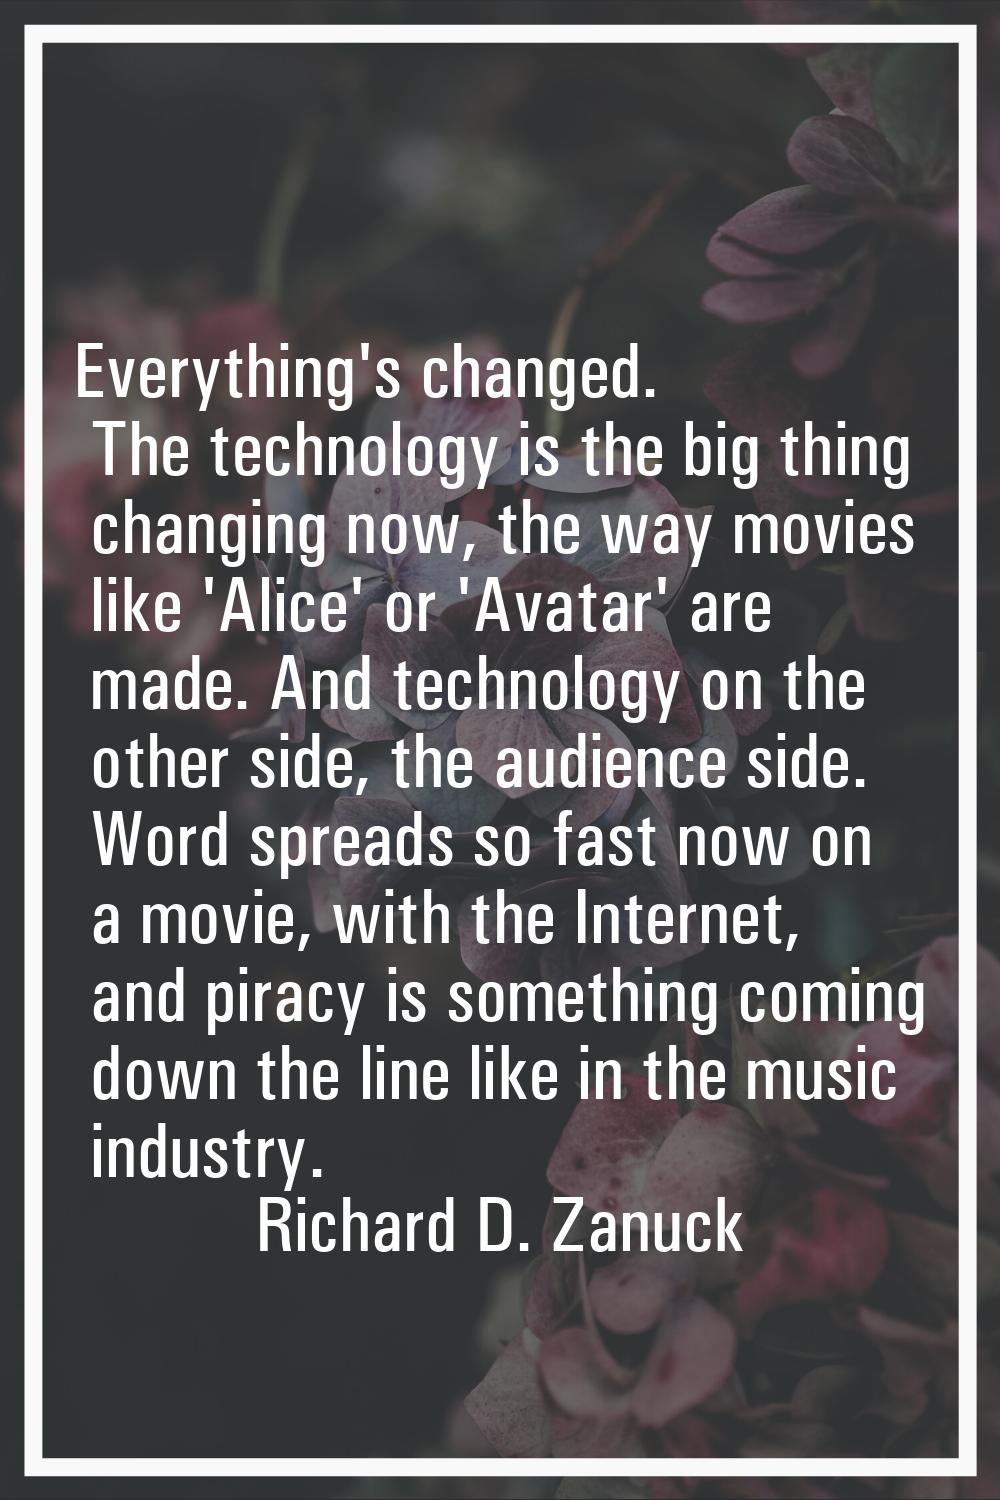 Everything's changed. The technology is the big thing changing now, the way movies like 'Alice' or 